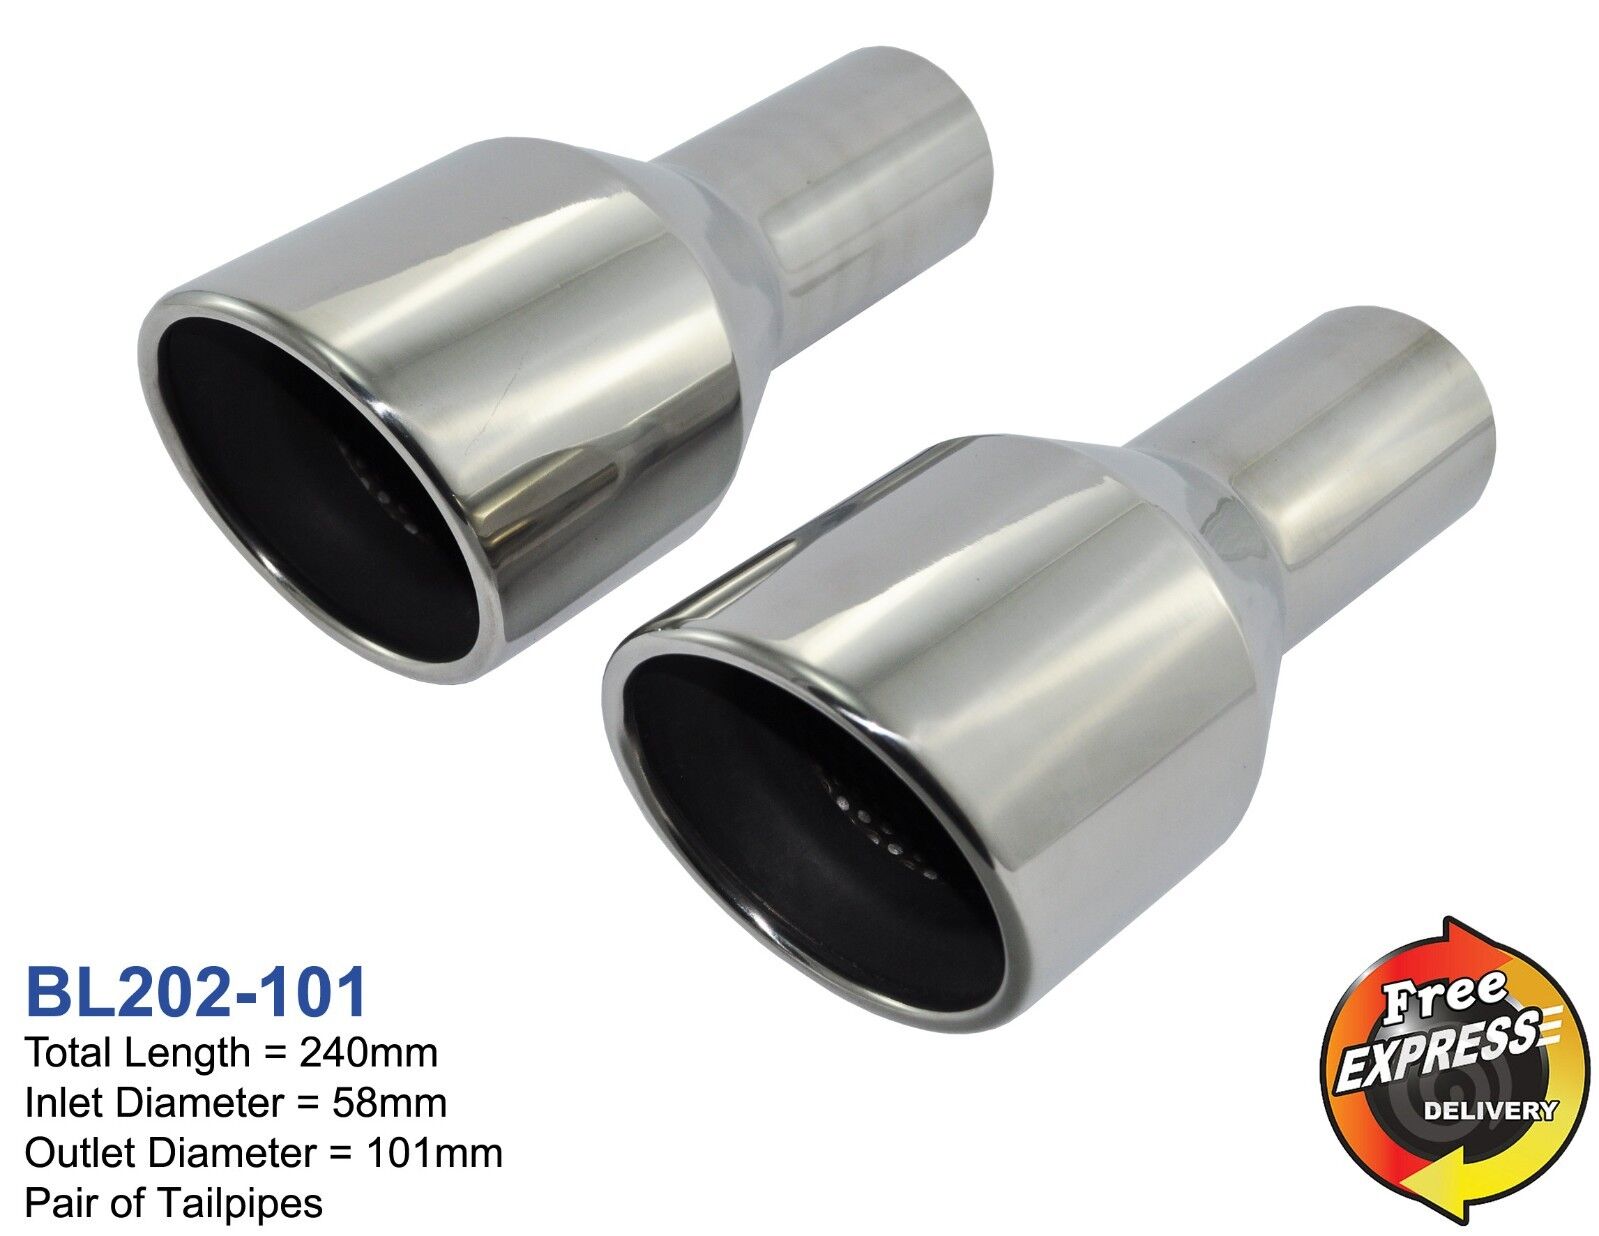 Exhaust tailpipes tips s/steel for VW Golf R32 R20 Audi A4 A5 A6 A7 A8 TT 101mm